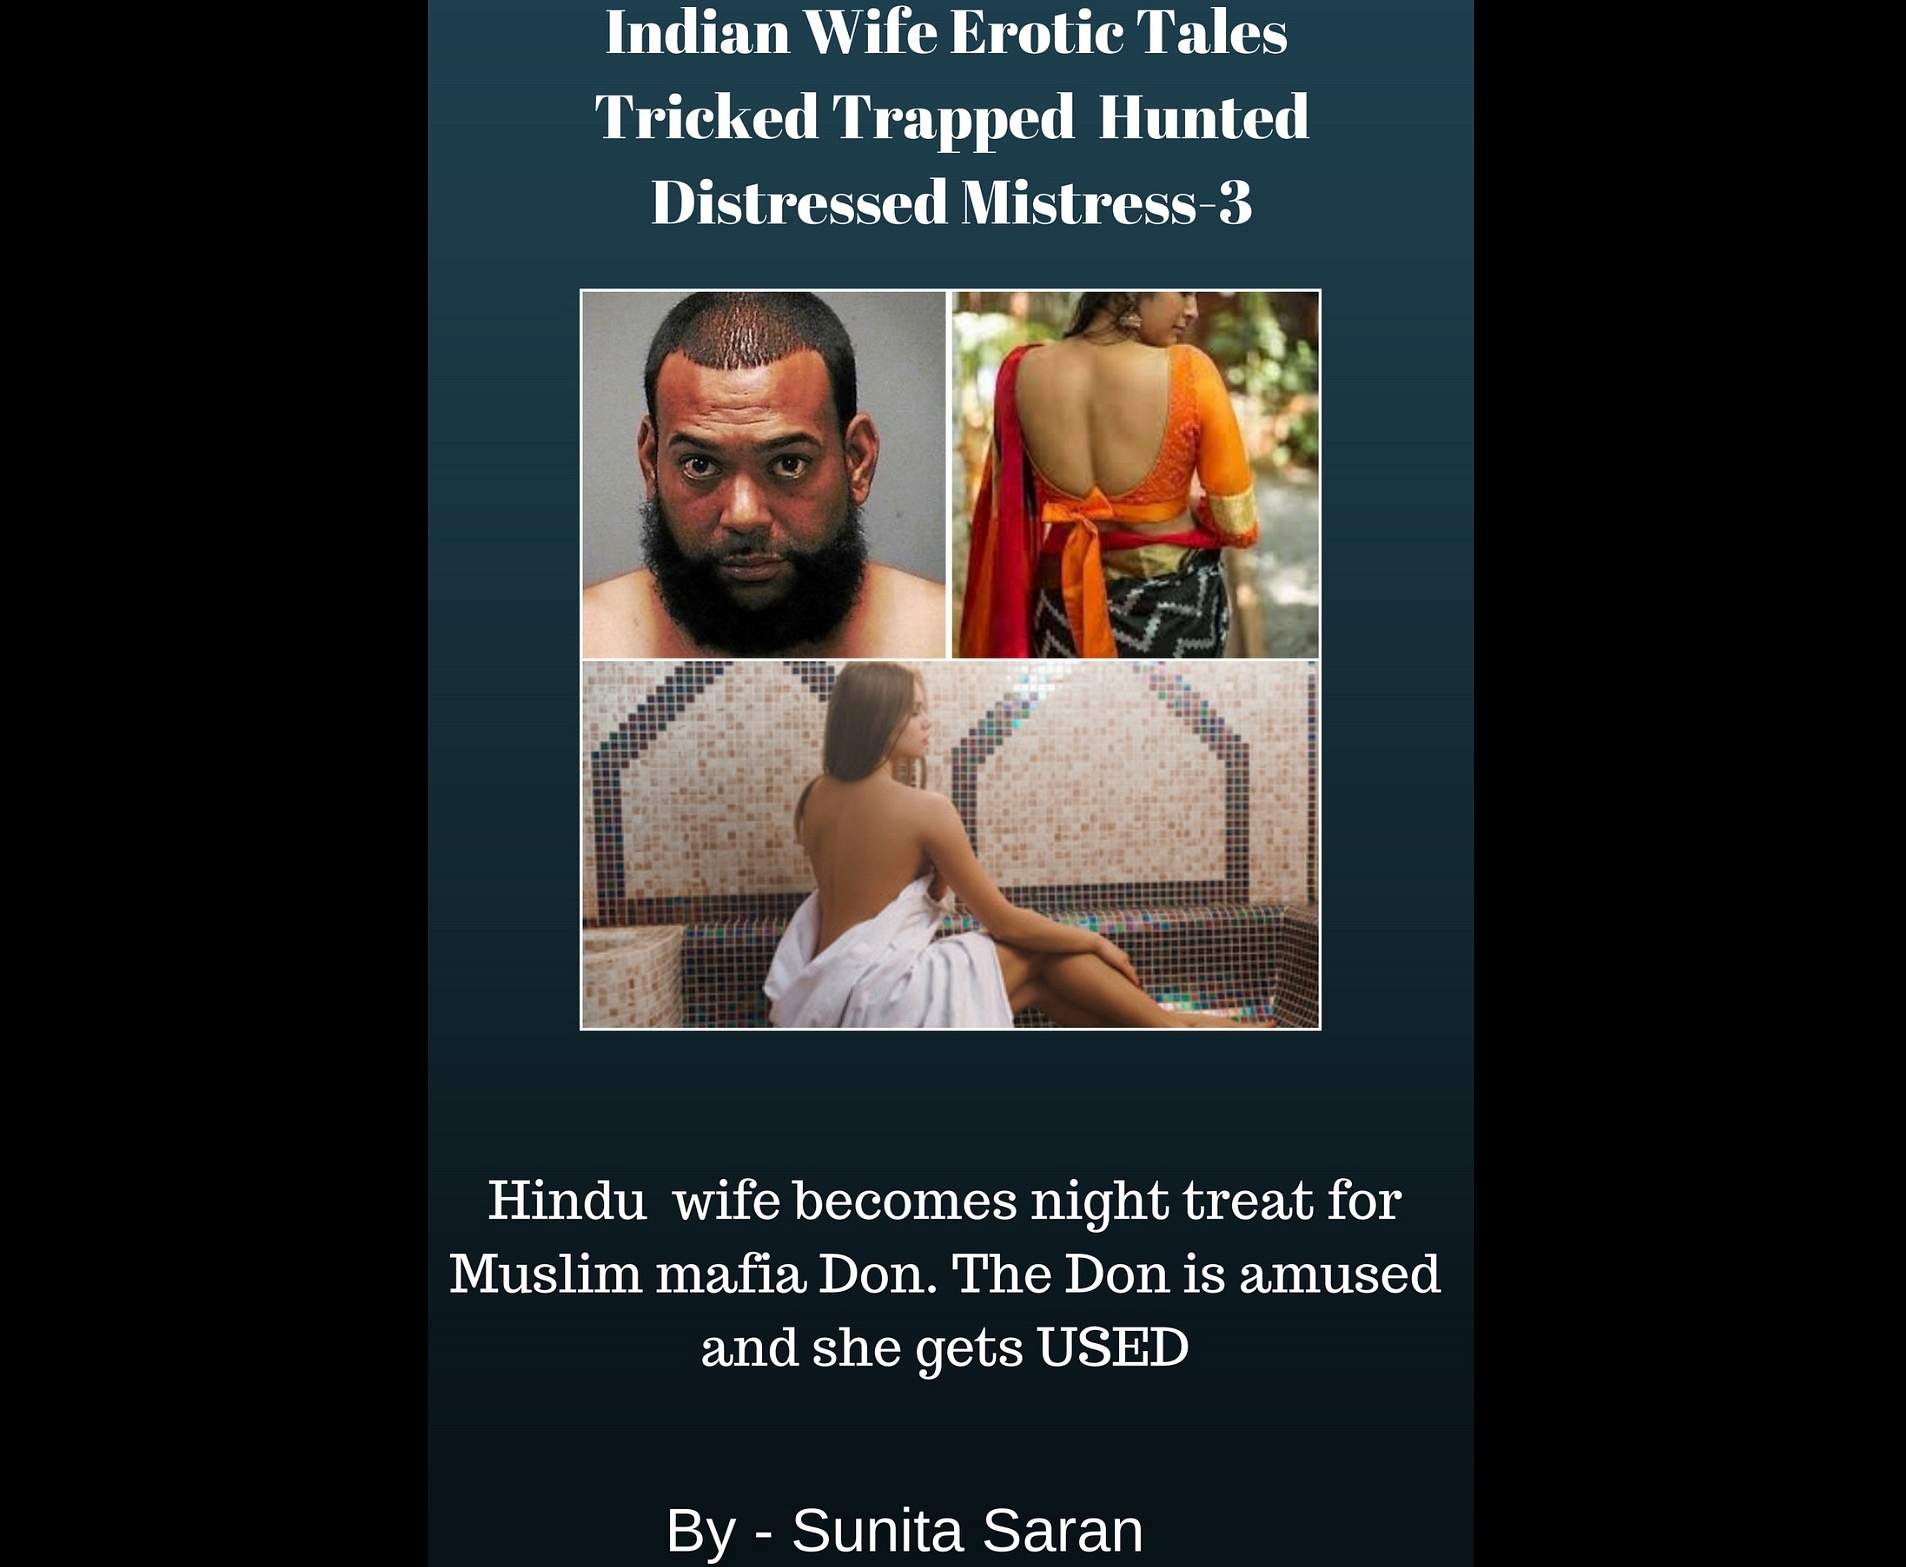 On Kindle Store, A Sea Of Pornographic And Rape Fantasy Books Featuring Hindu Women And Muslim hq picture